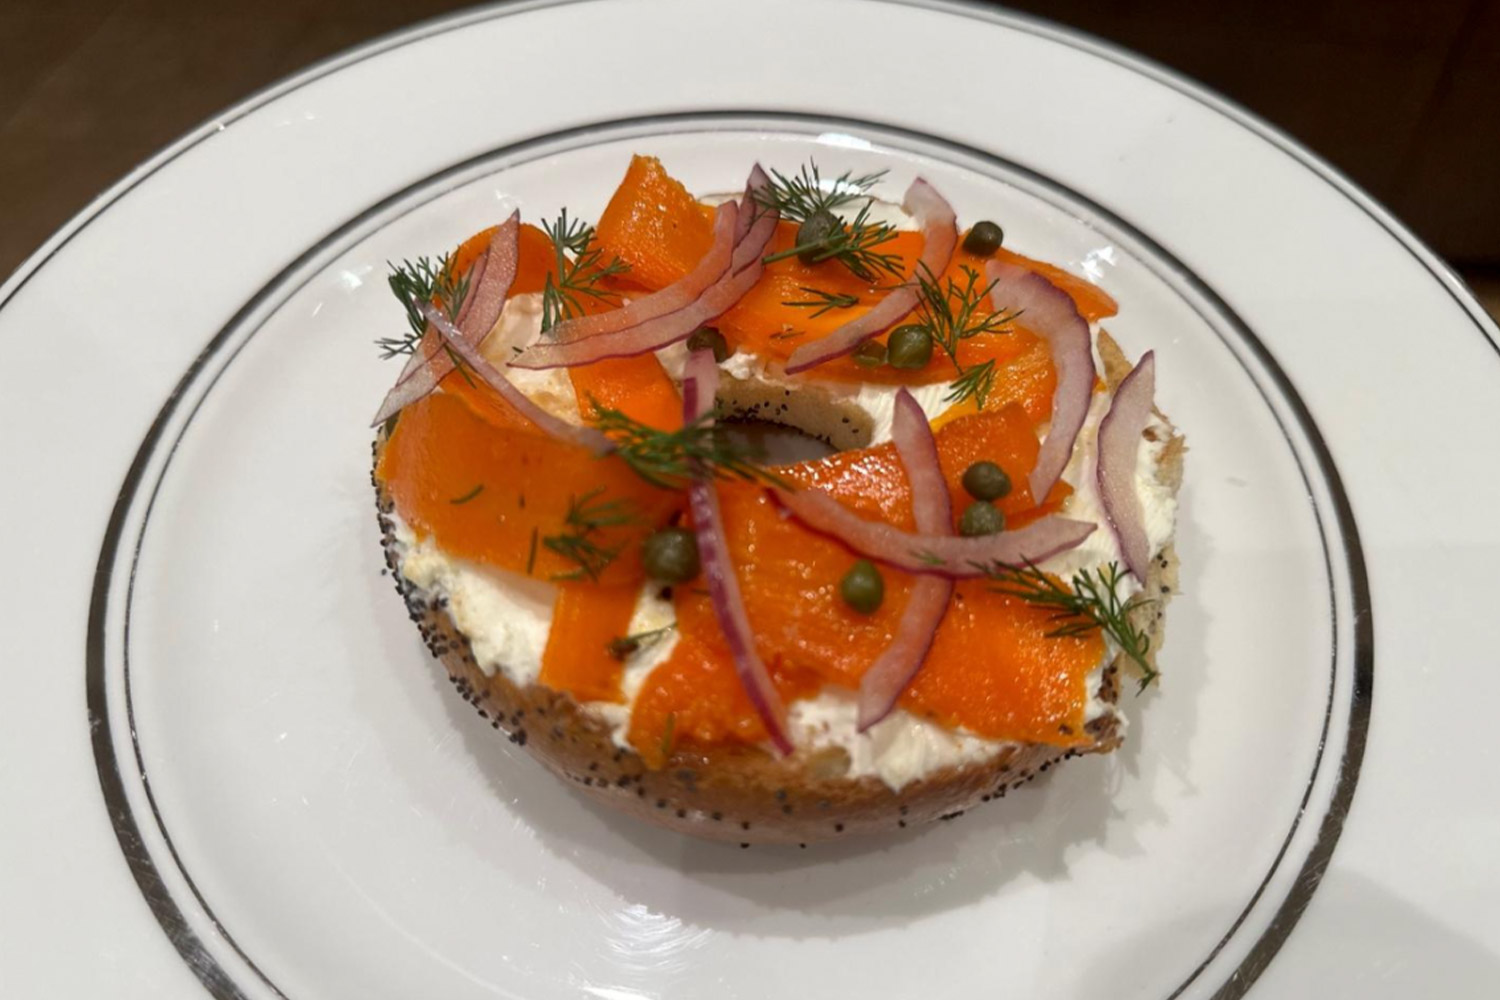 Bagel with vegan cream cheese and vegetables on top